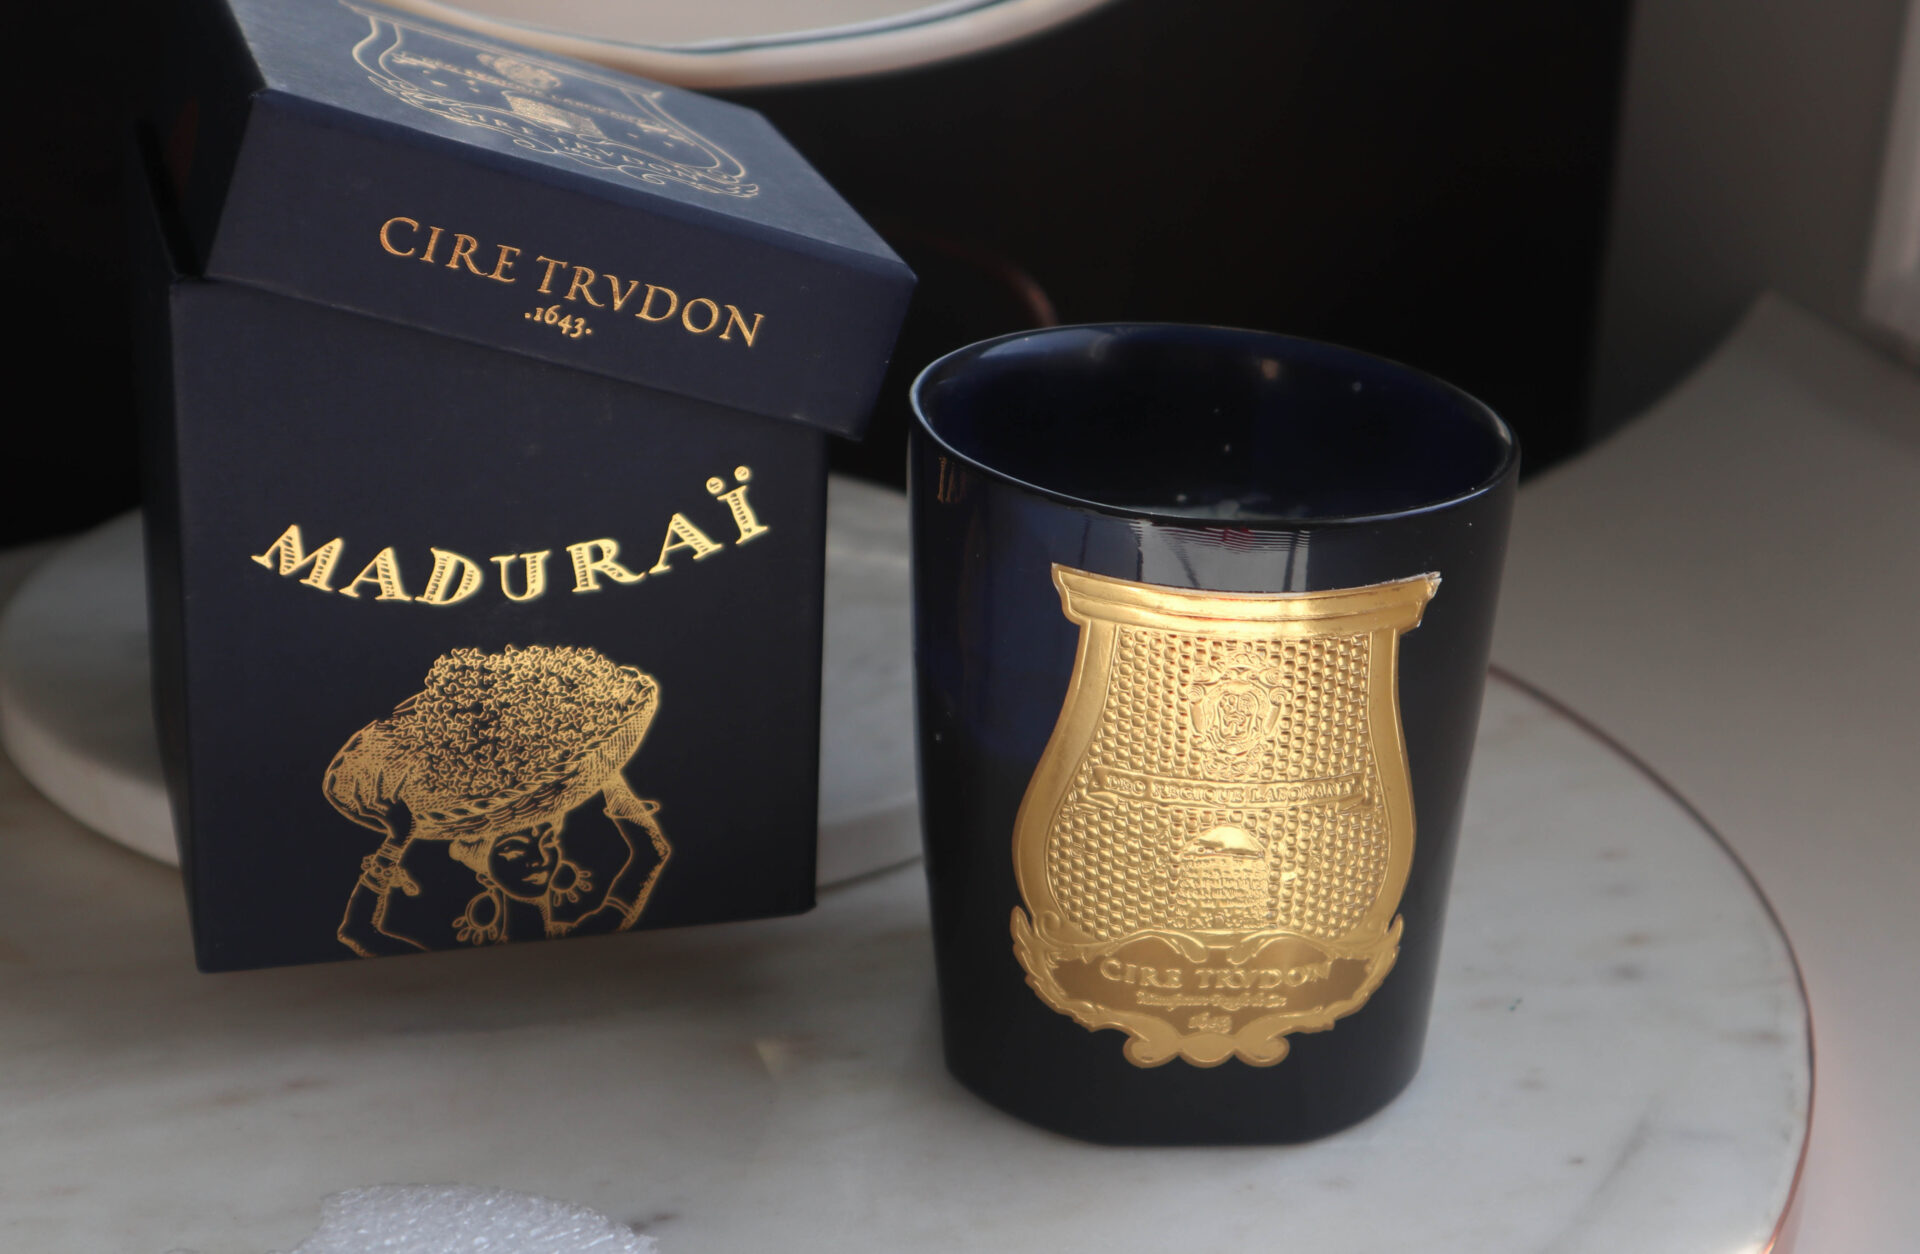 Cire Trudon Madurai Candle Review - The Velvet Life